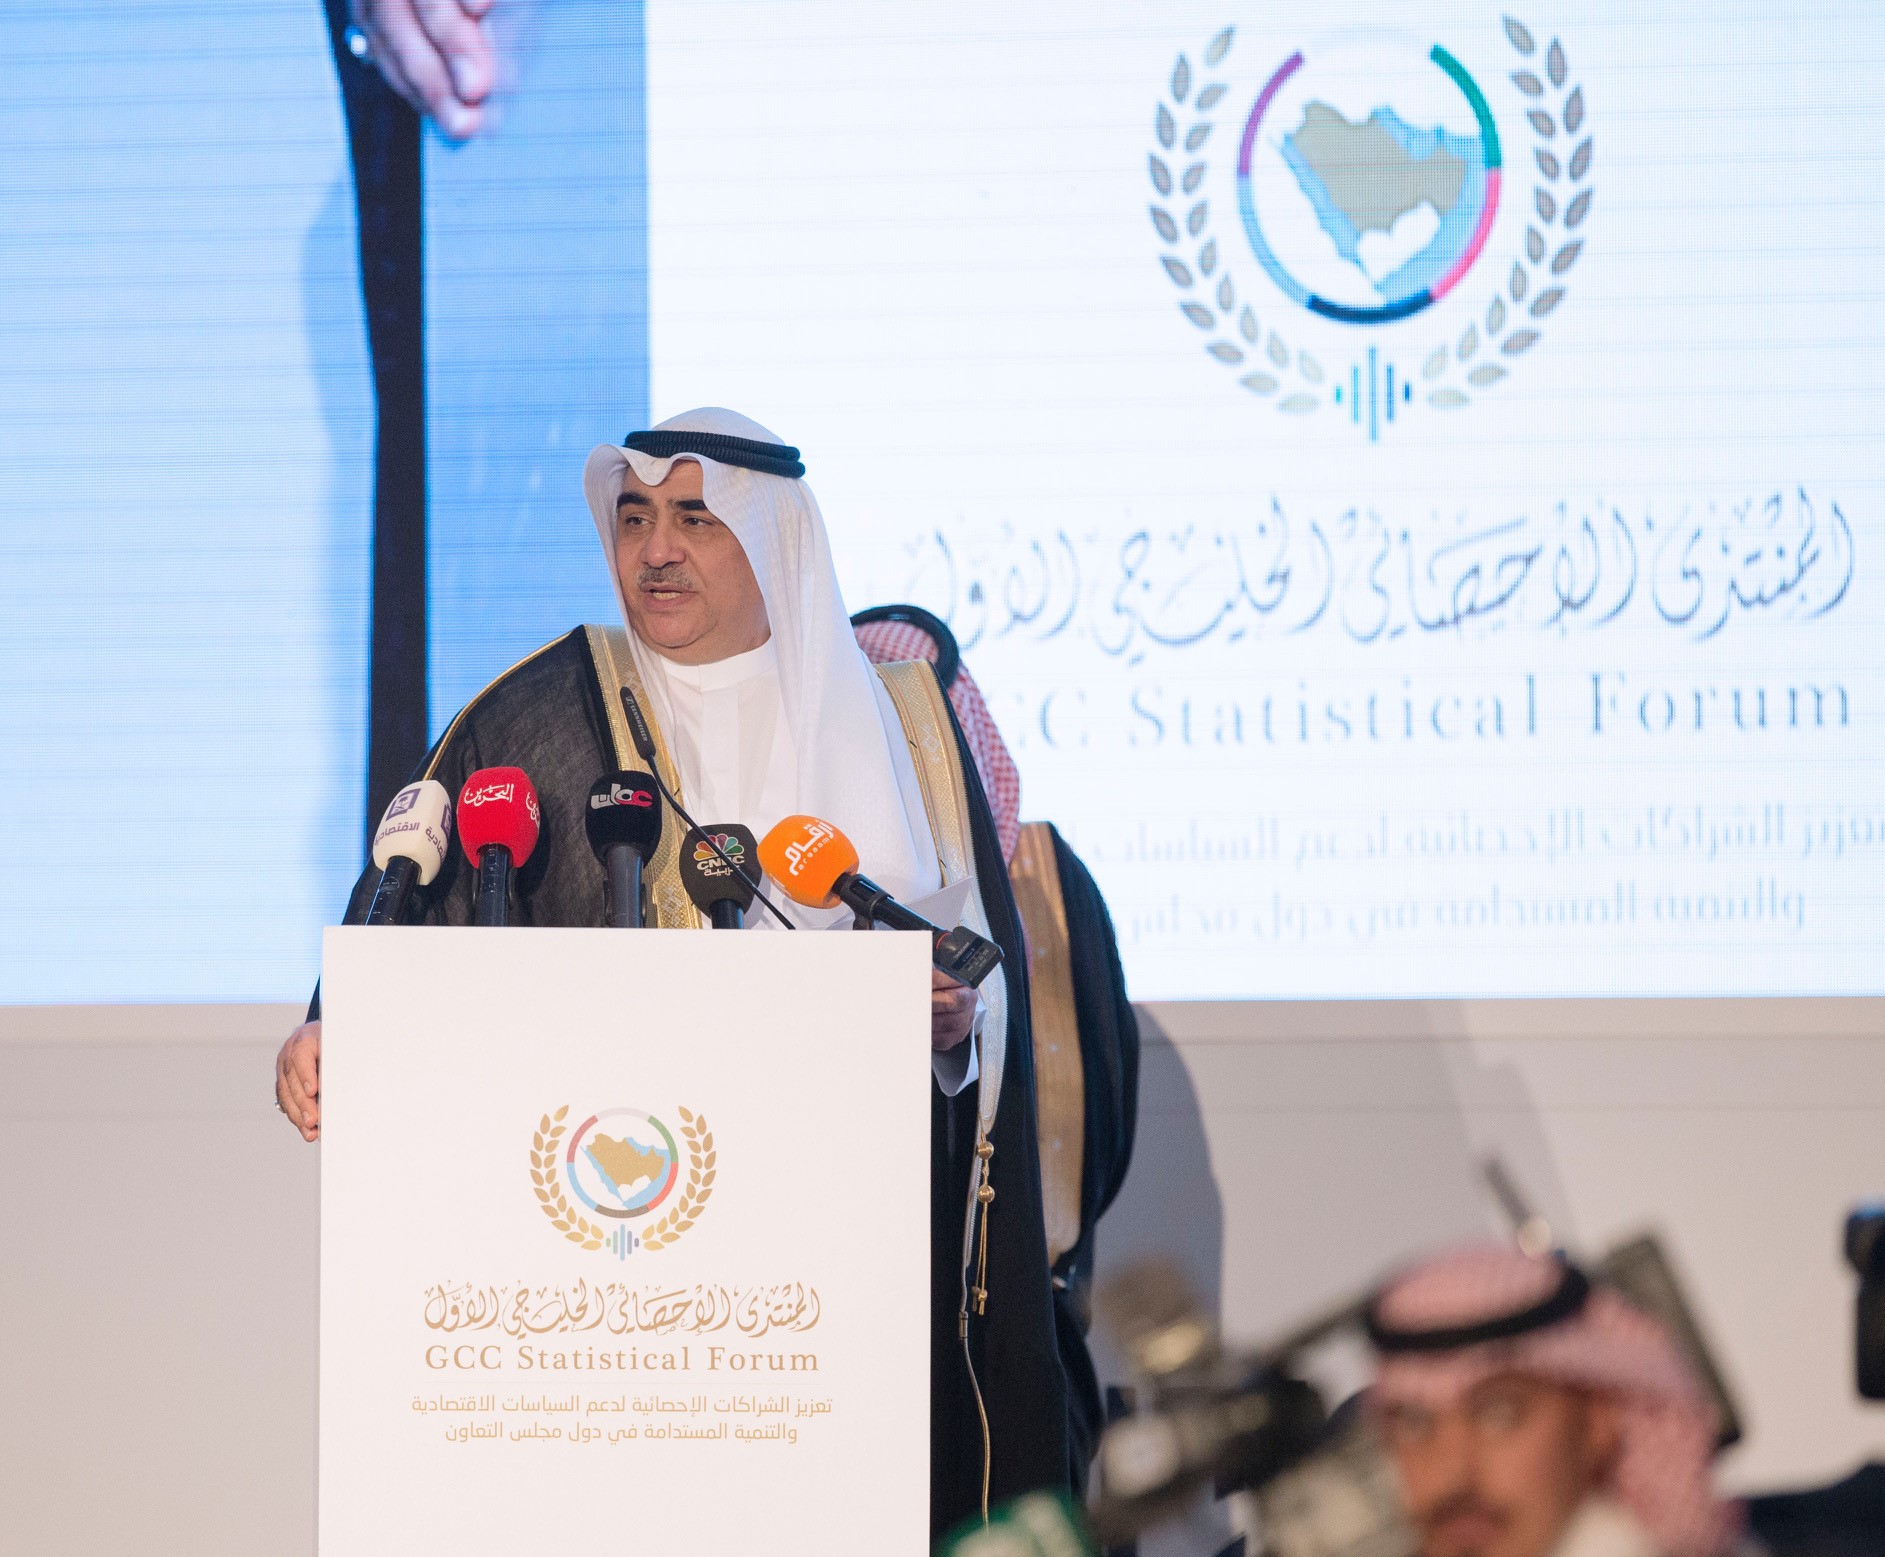 Minister of Economy and Planning Adel Faqih inaugurates the 1st Gulf Cooperation Council (GCC) statistics forum in Riyadh